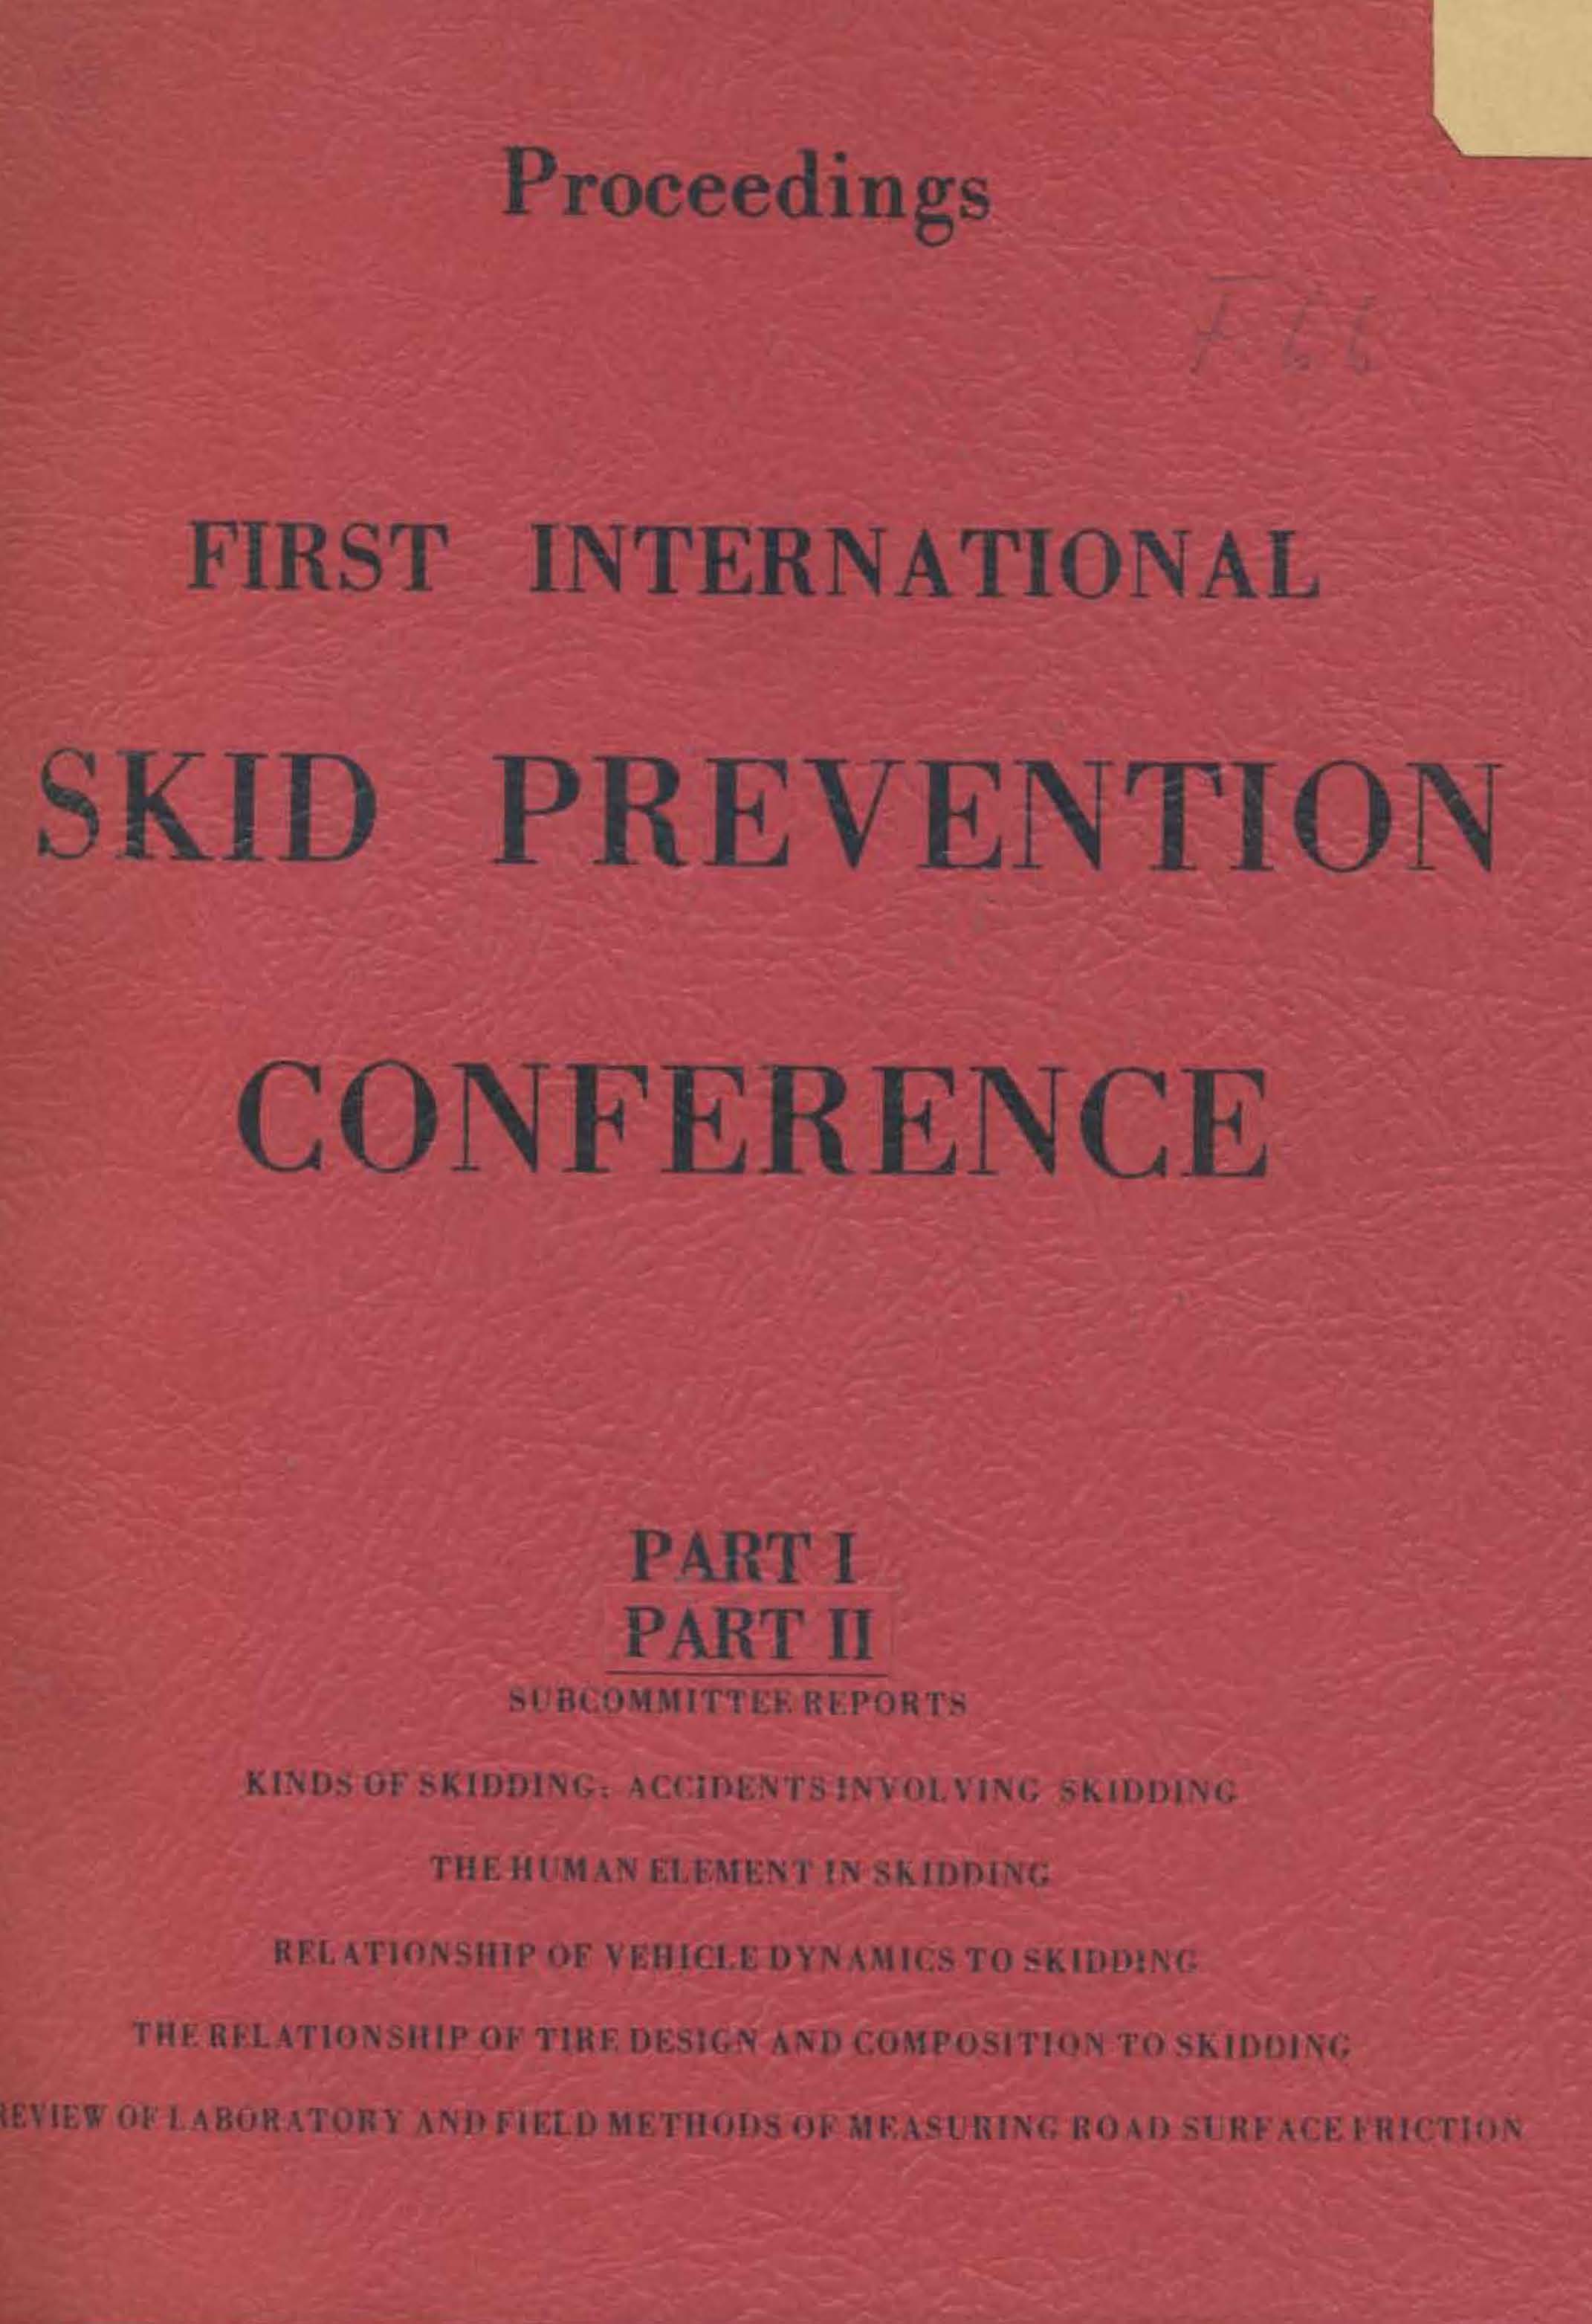 Proceedings, First International Skid Prevention Conference, Part I, Part II, Aug. 1959